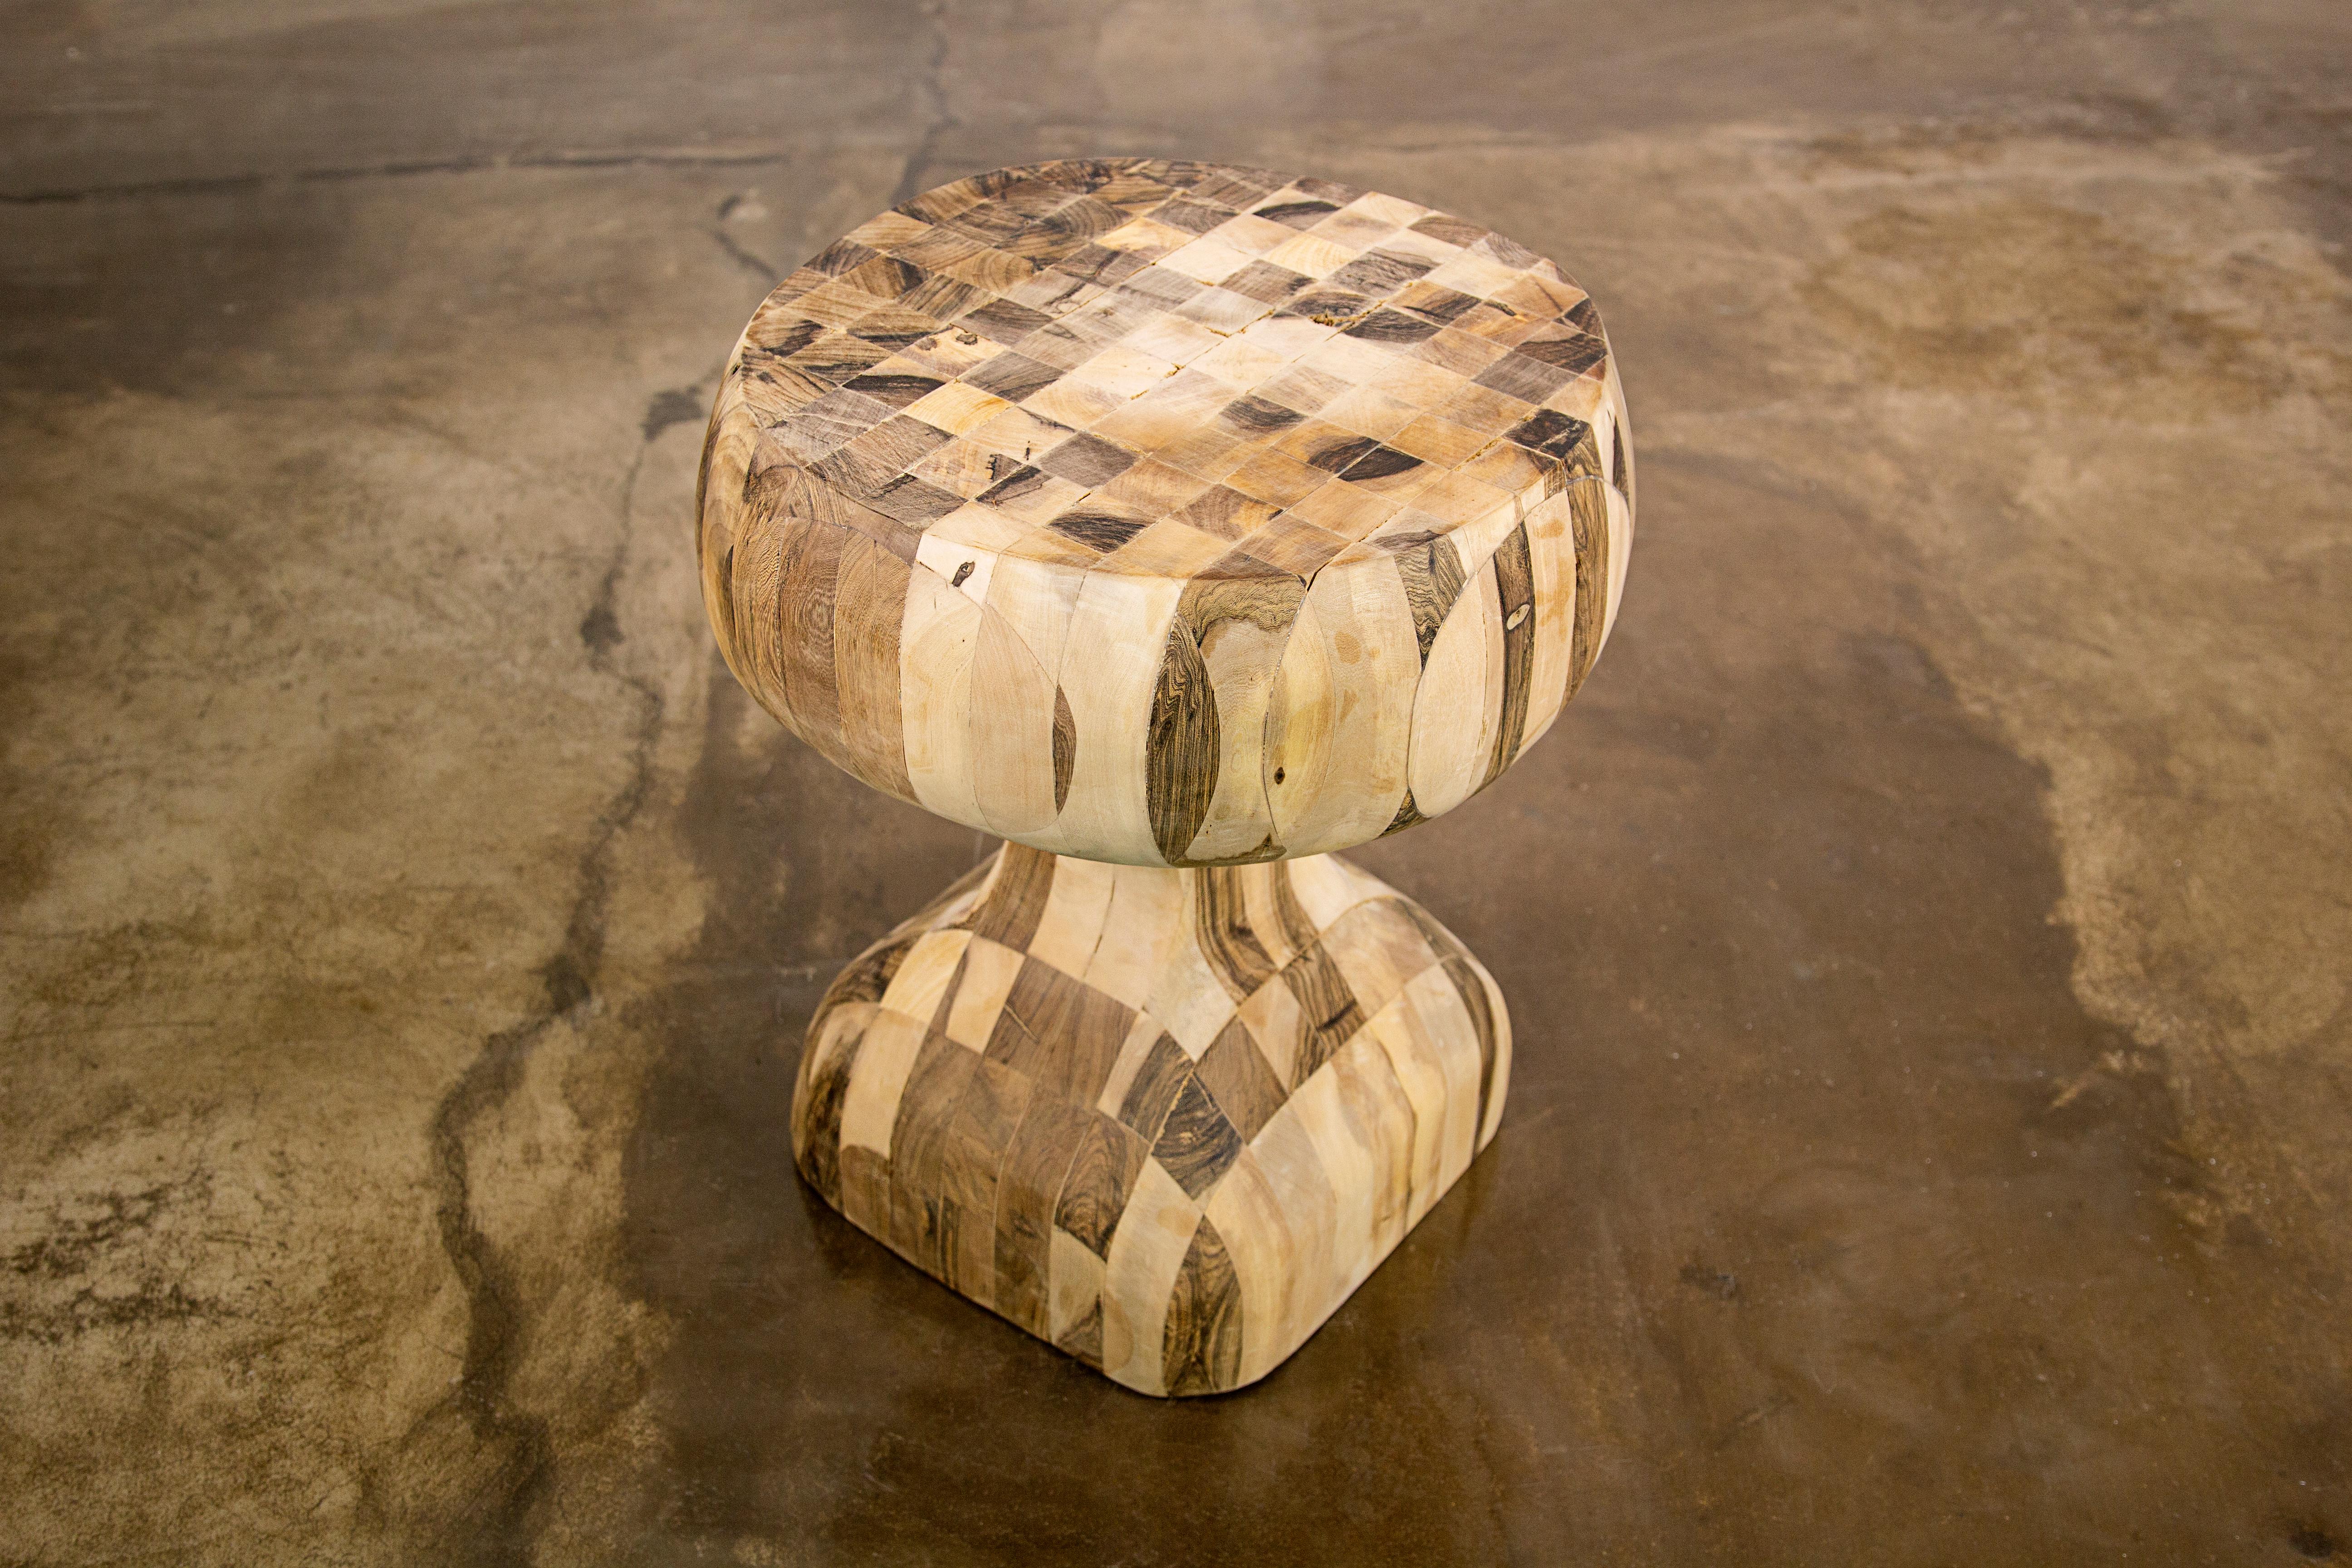 This one-of-a-kind solid wood side table is an experiment from Costantini based on their popular Caliz side table. We glued together dozens of solid pieces of wood, then carved it with a chainsaw, then hand sanded it and lightly finished it to